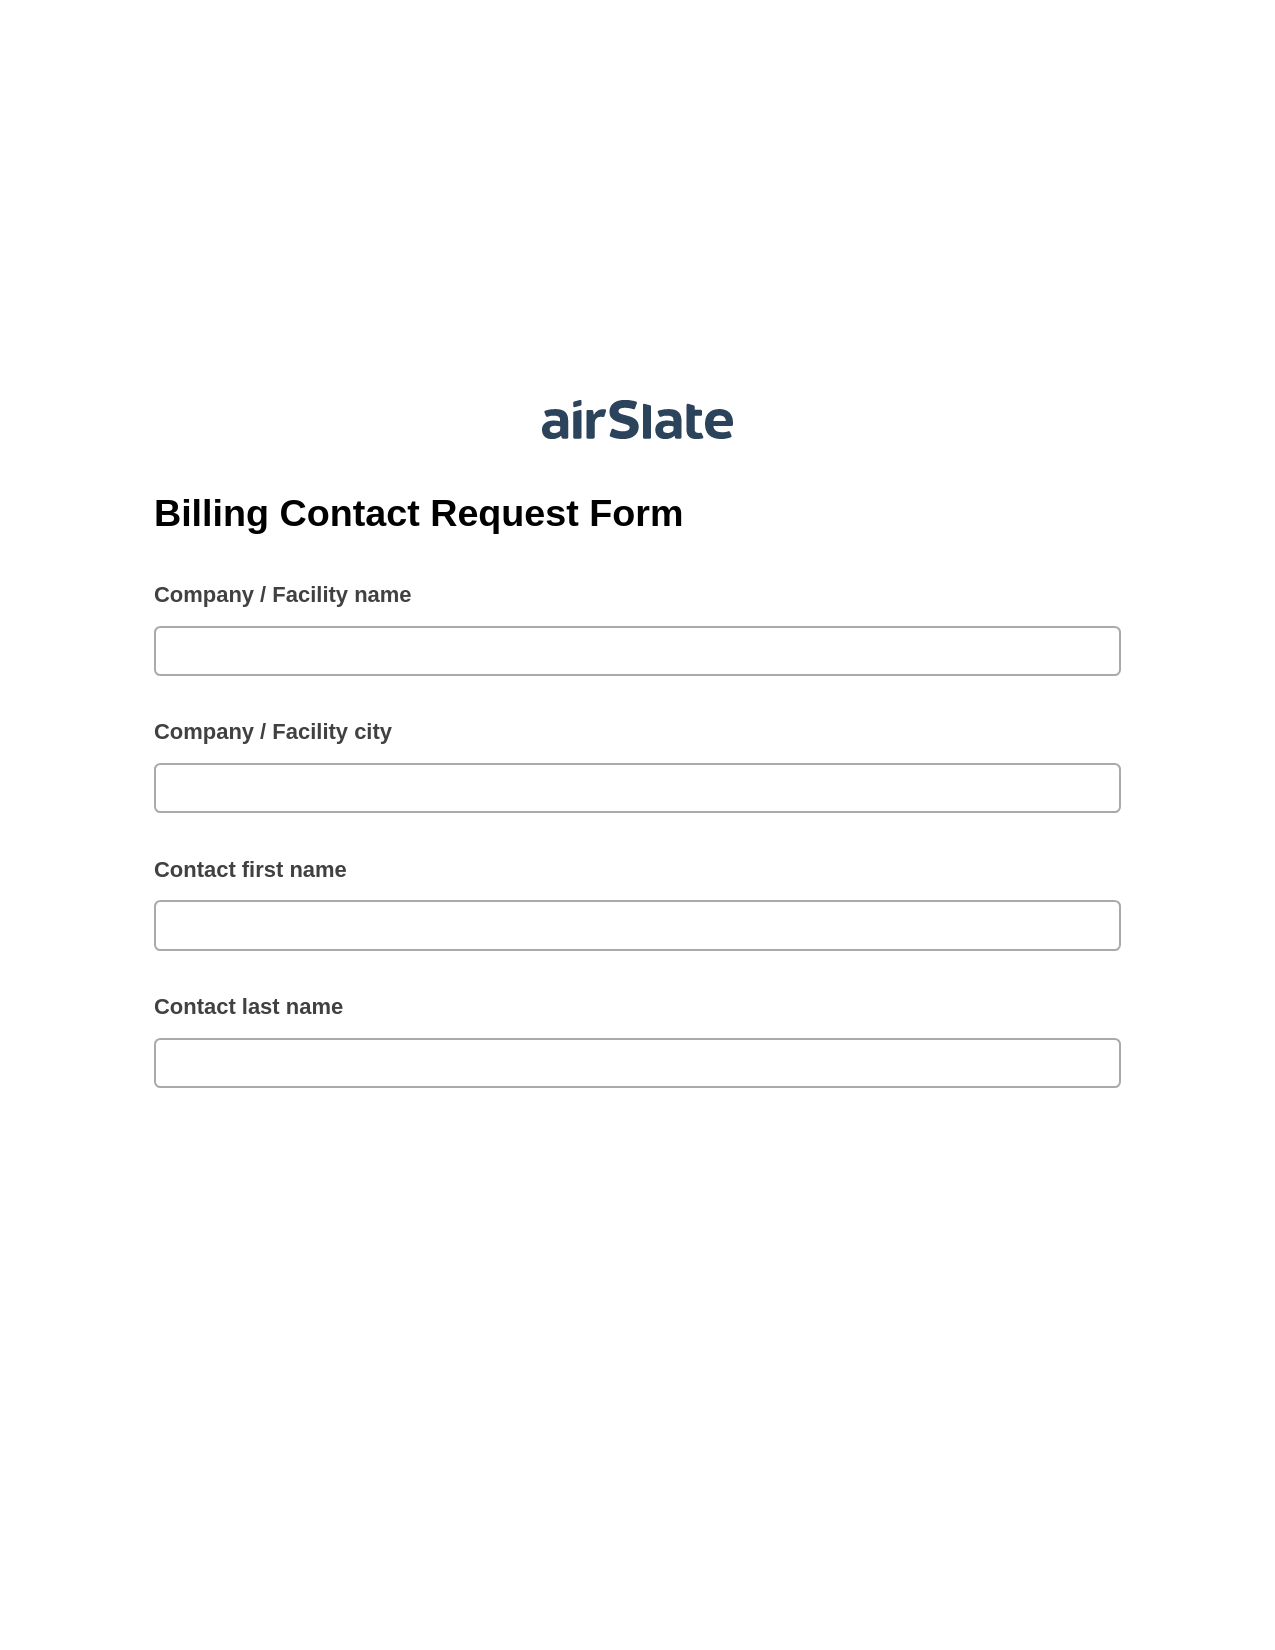 Multirole Billing Contact Request Form Pre-fill from Google Sheets Bot, Create MS Dynamics 365 Records Bot, Archive to SharePoint Folder Bot